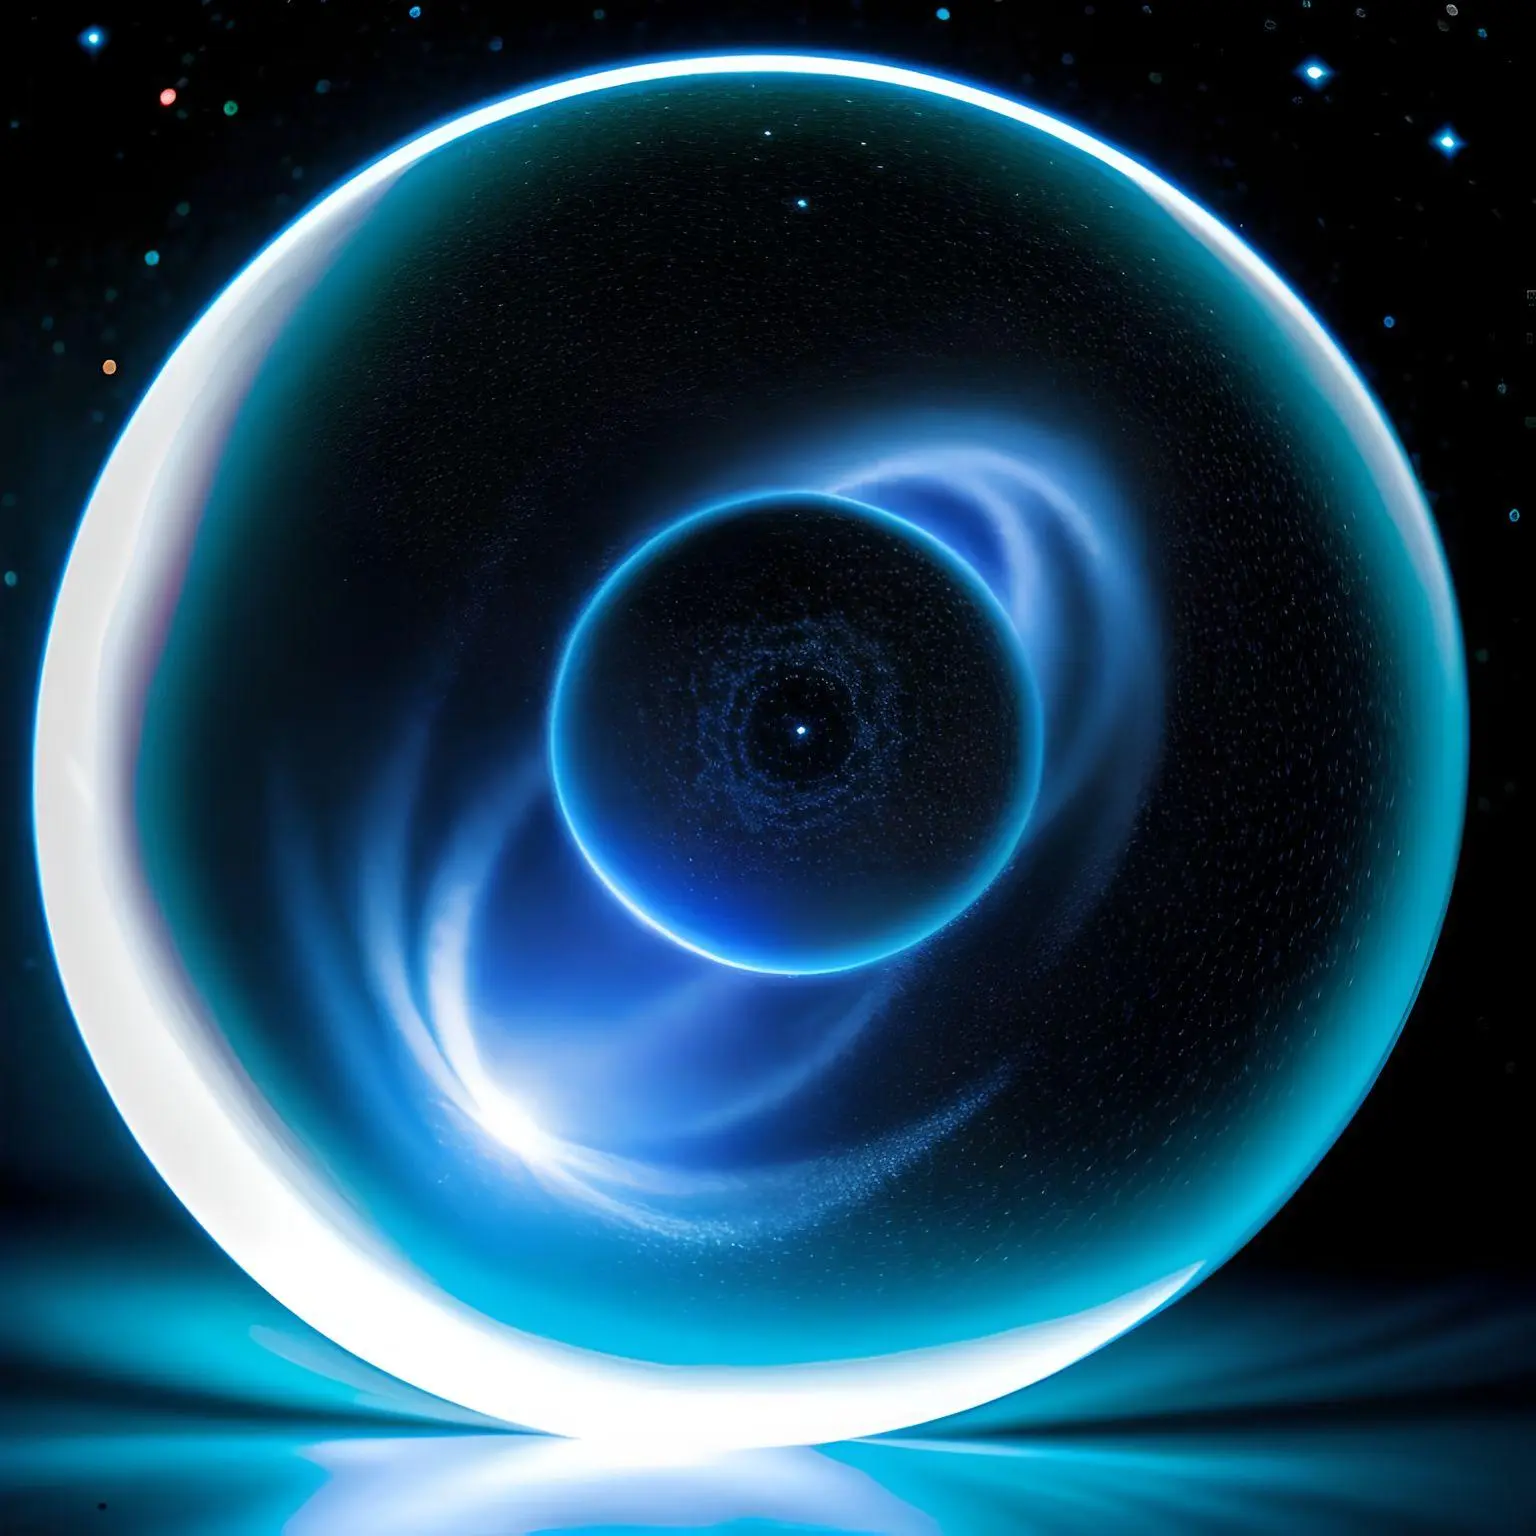 An abstract image of a crystal ball revealing shadowy, indistinct figures, against a background of swirling cosmic stardust, with a pathway leading from the ball towards a distant, glowing horizon.